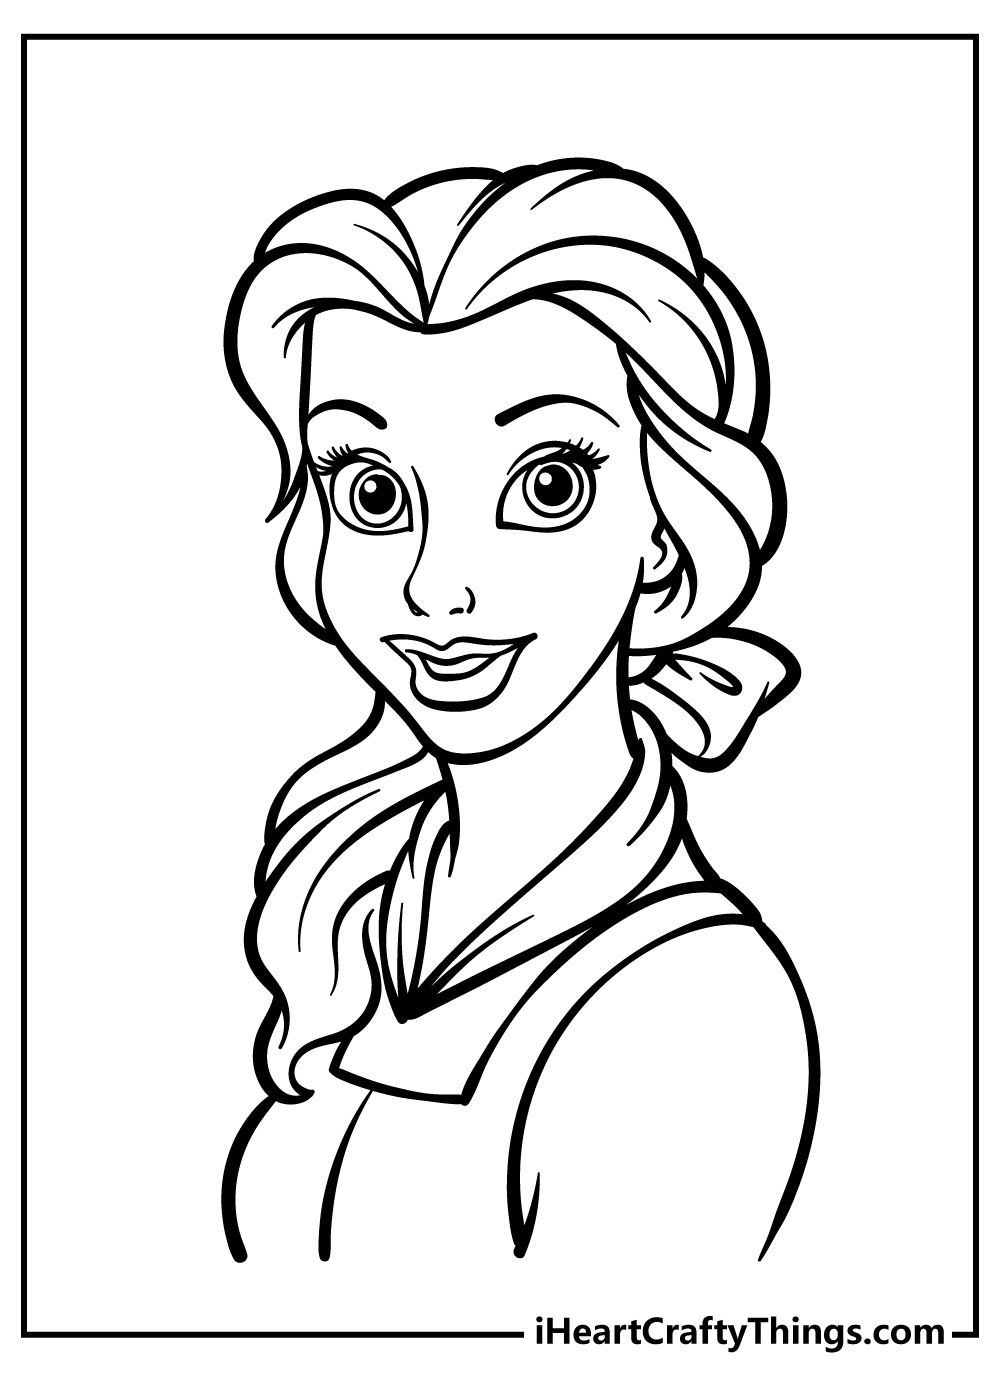 Belle Coloring Pages free pdf download